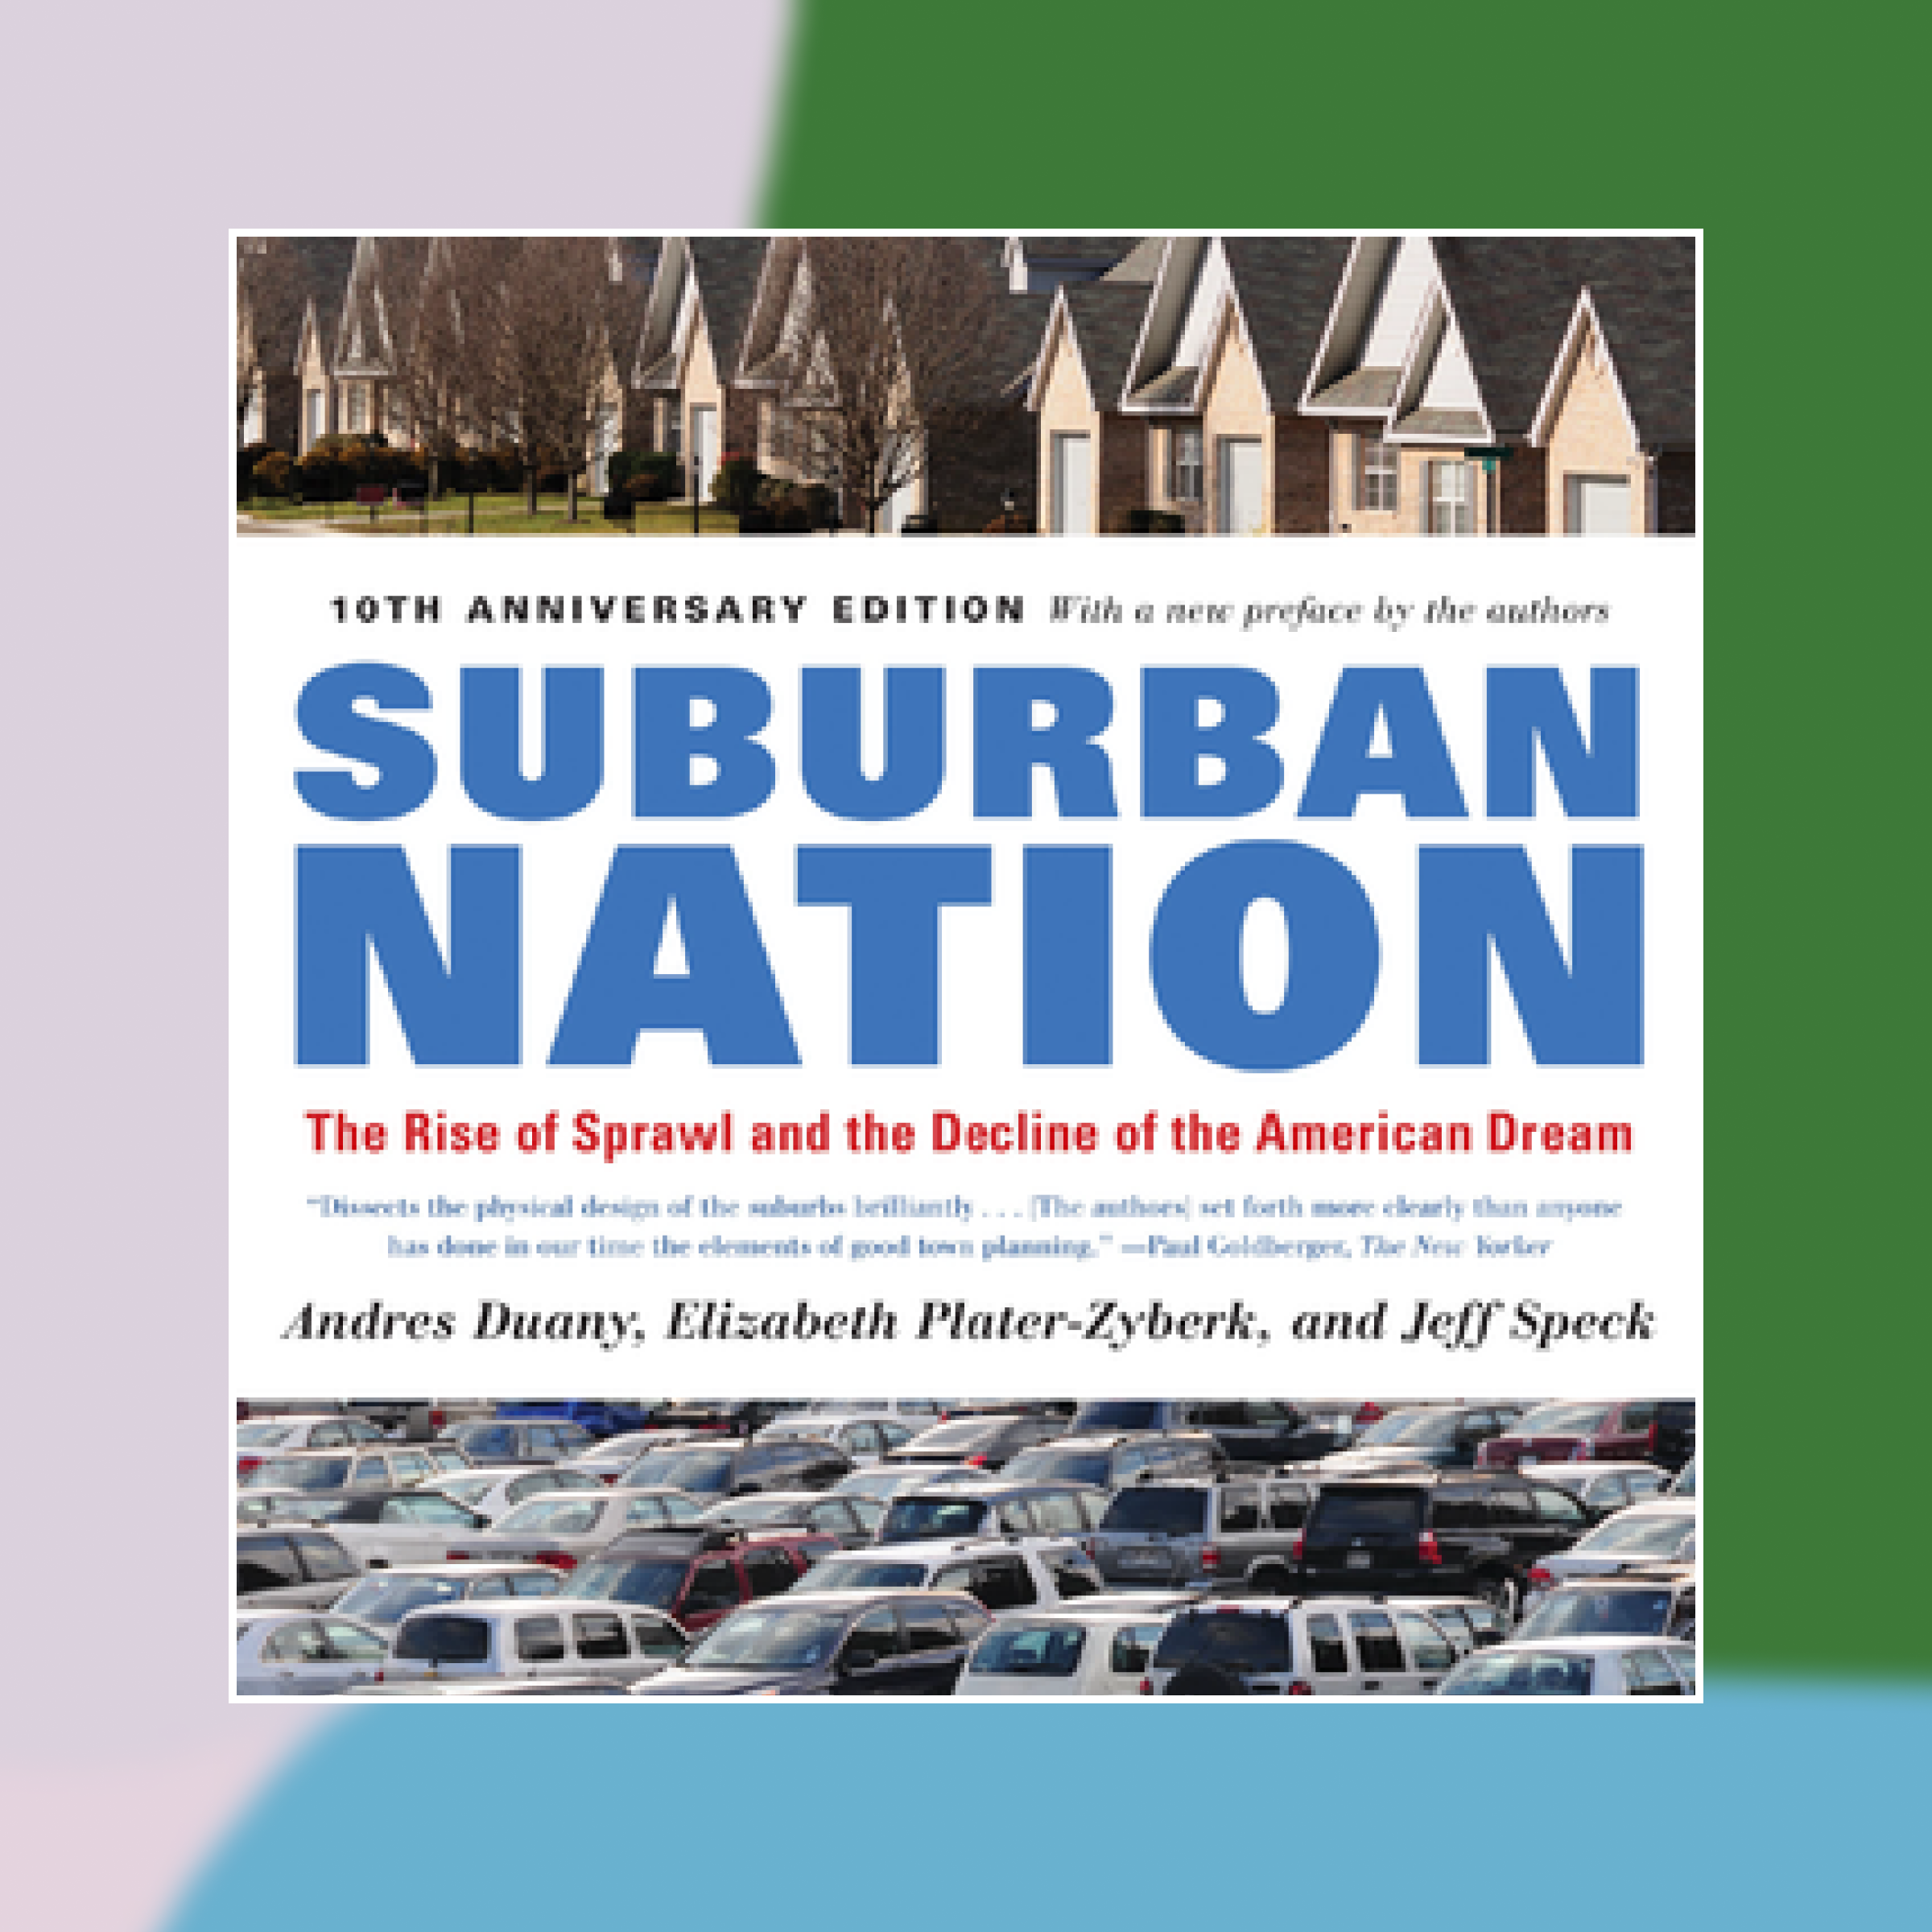 Book cover of Suburban Nation against an abstract painted background